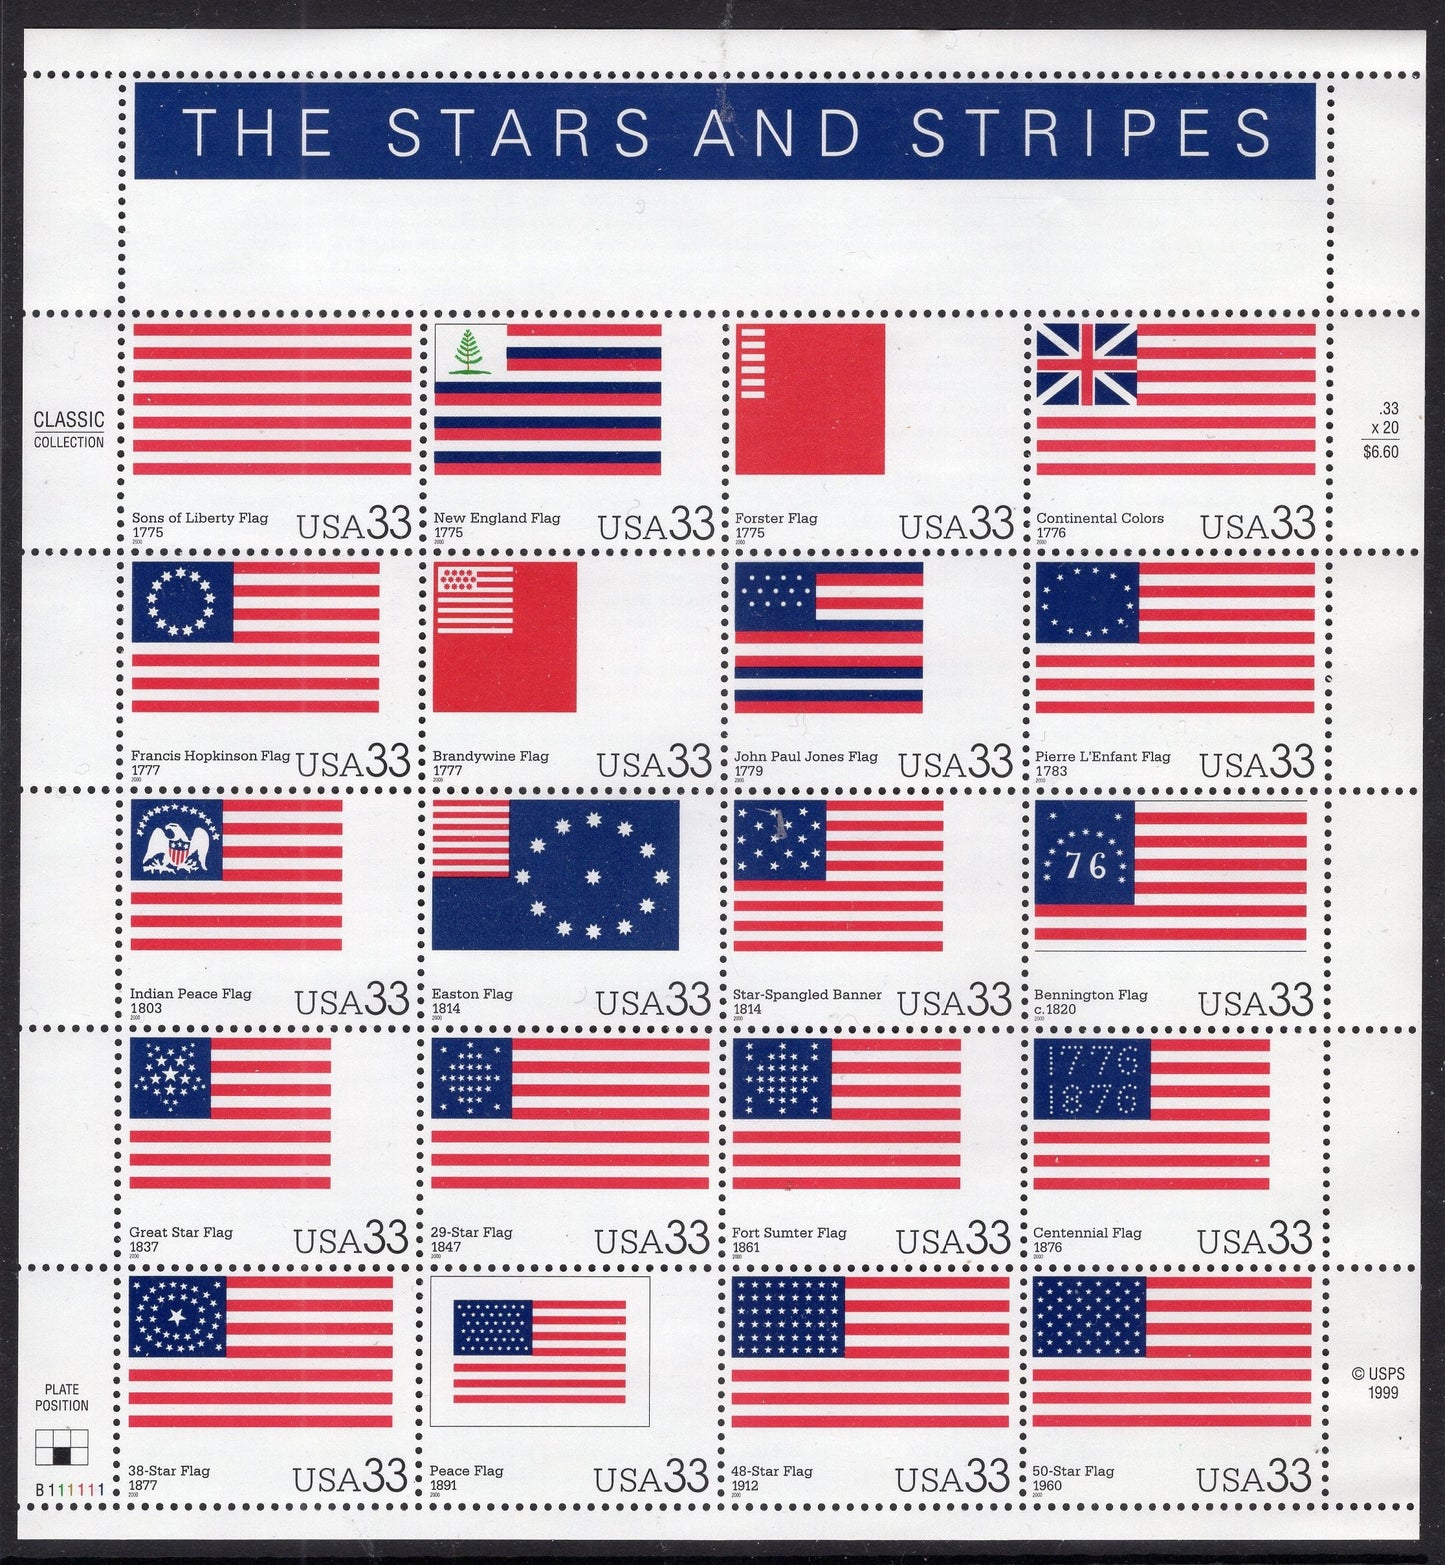 20 Different 33c FLAGS US Postage Stamps in Blocks - Unused, Bright, Post Office Fresh - Issued in 2000 - s3403